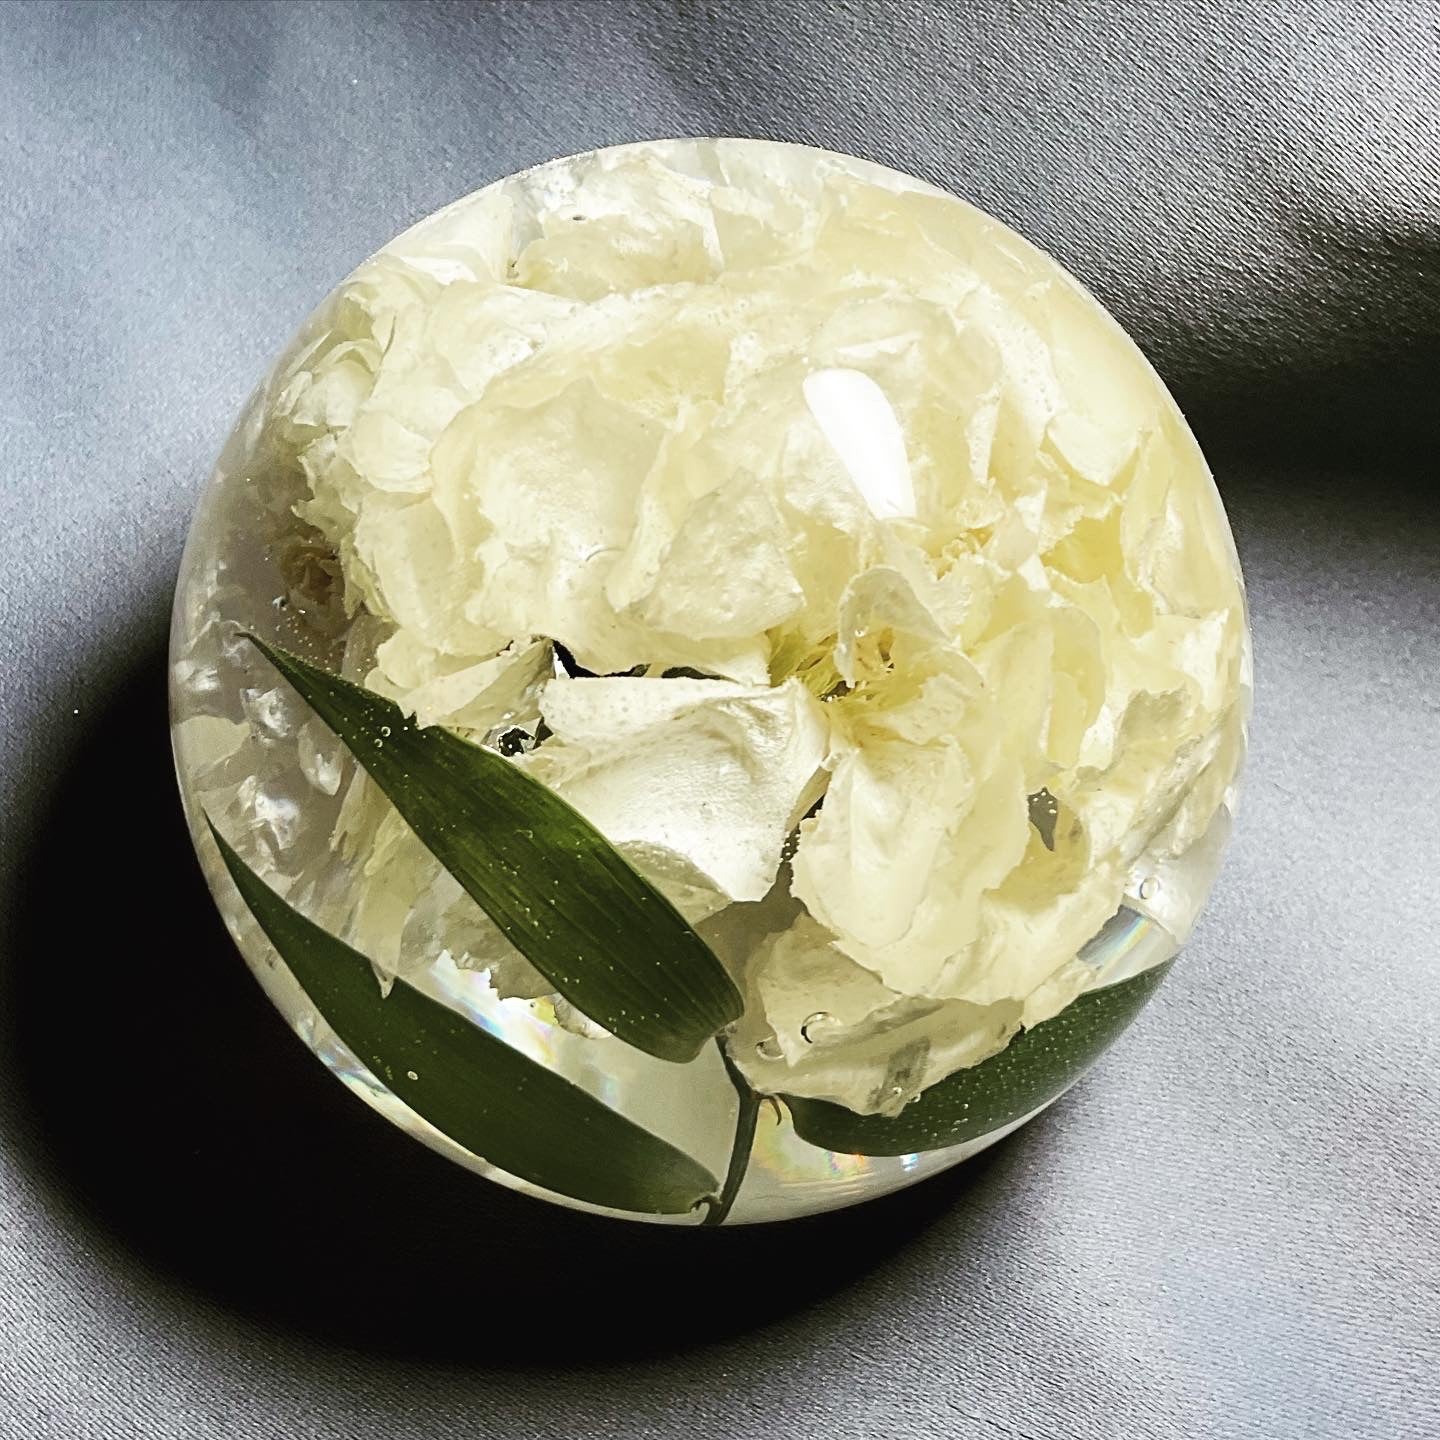 A decorative sphere paperweight made of resin, showcasing beautifully preserved wedding flowers, adding a unique and memorable touch to any space.,